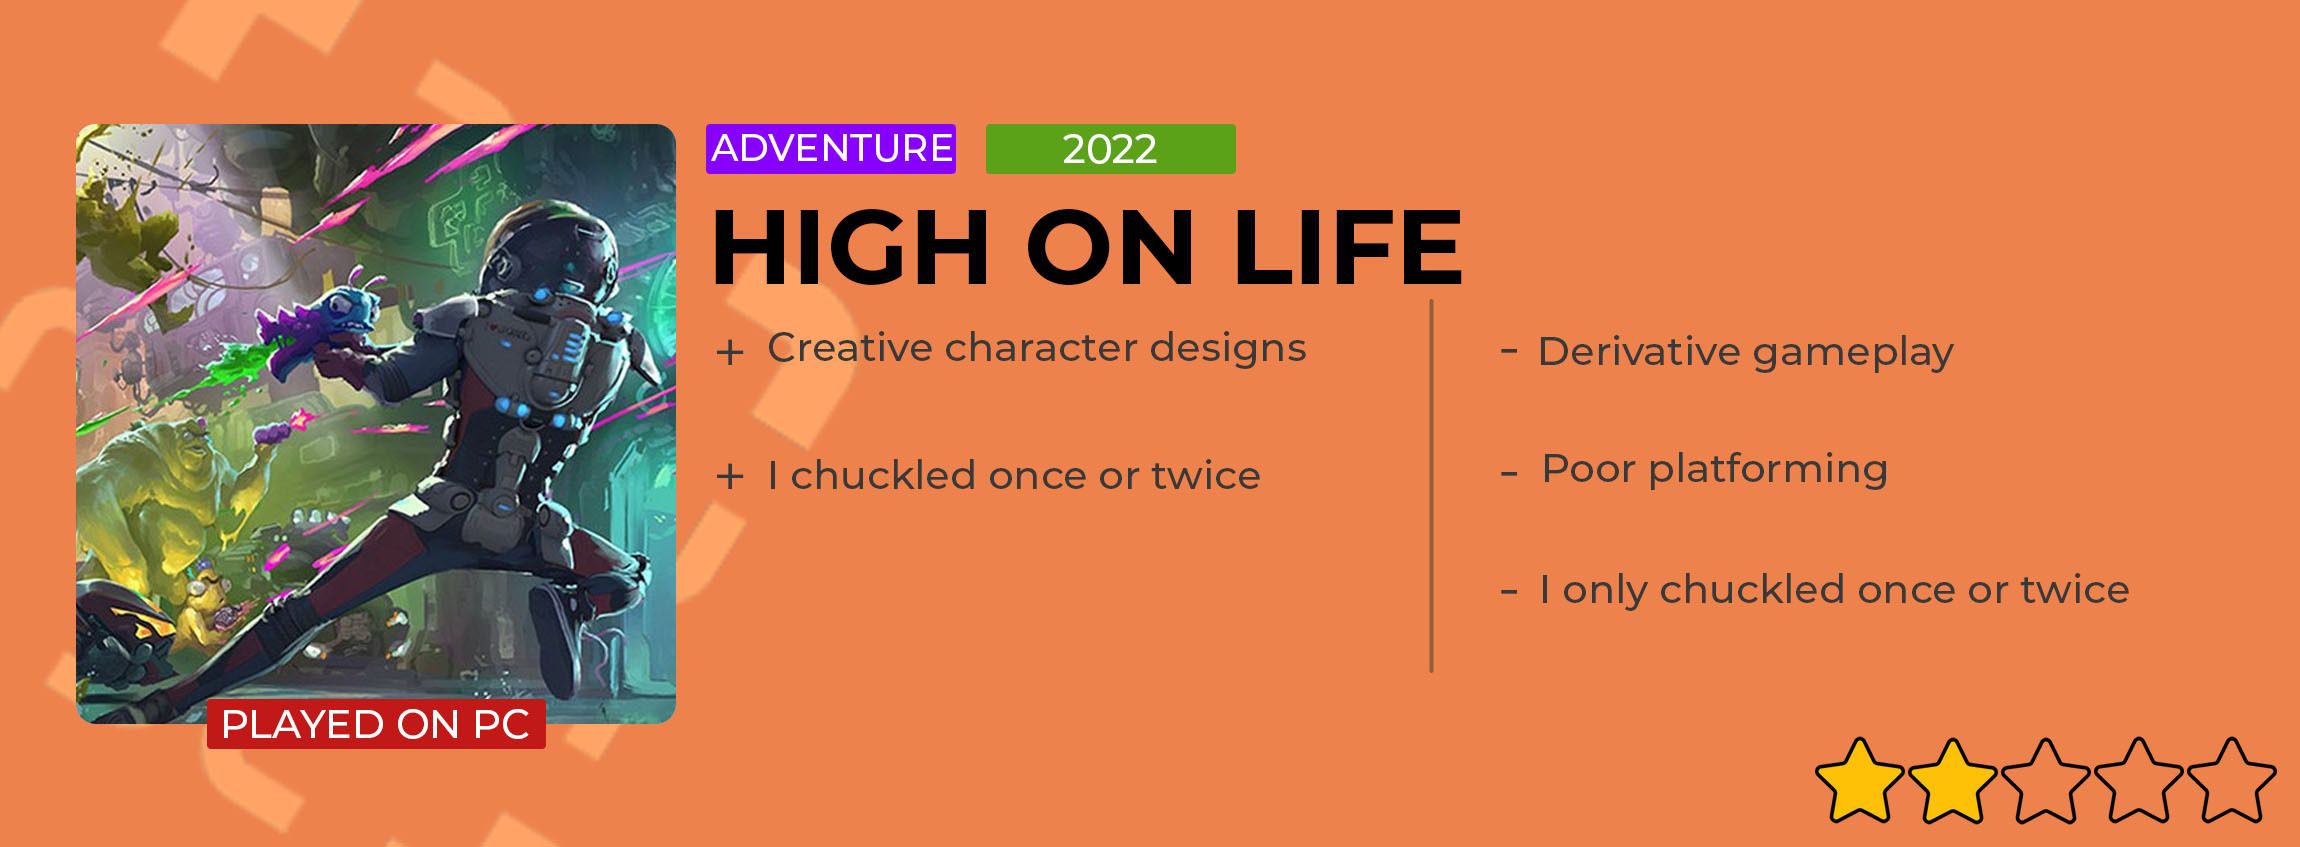 High on Life review card